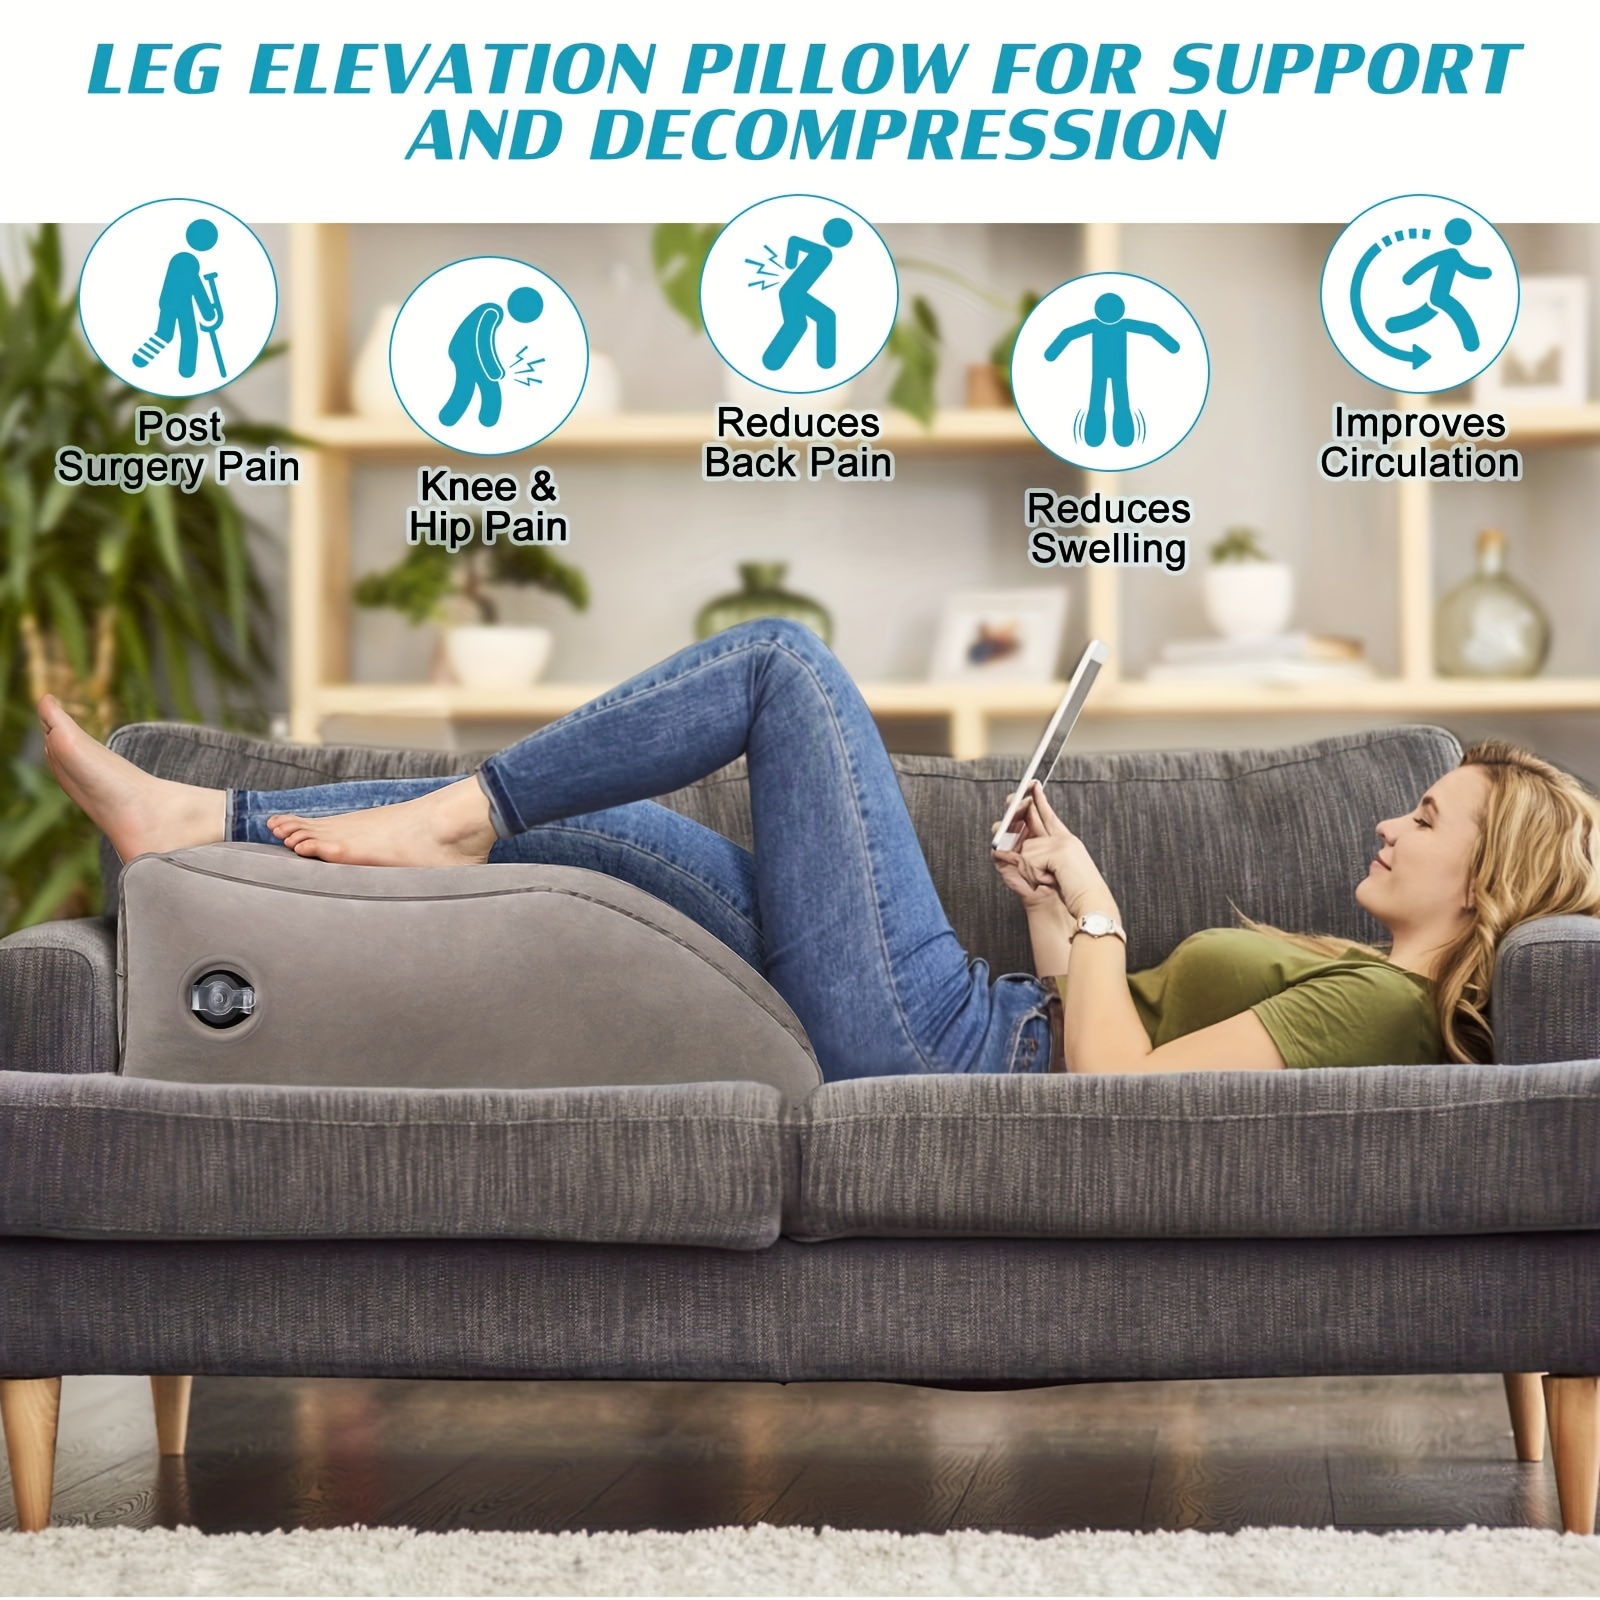 LightEase Memory Foam Leg, Knee, Ankle Support and Elevation Leg Pillow for  Surgery